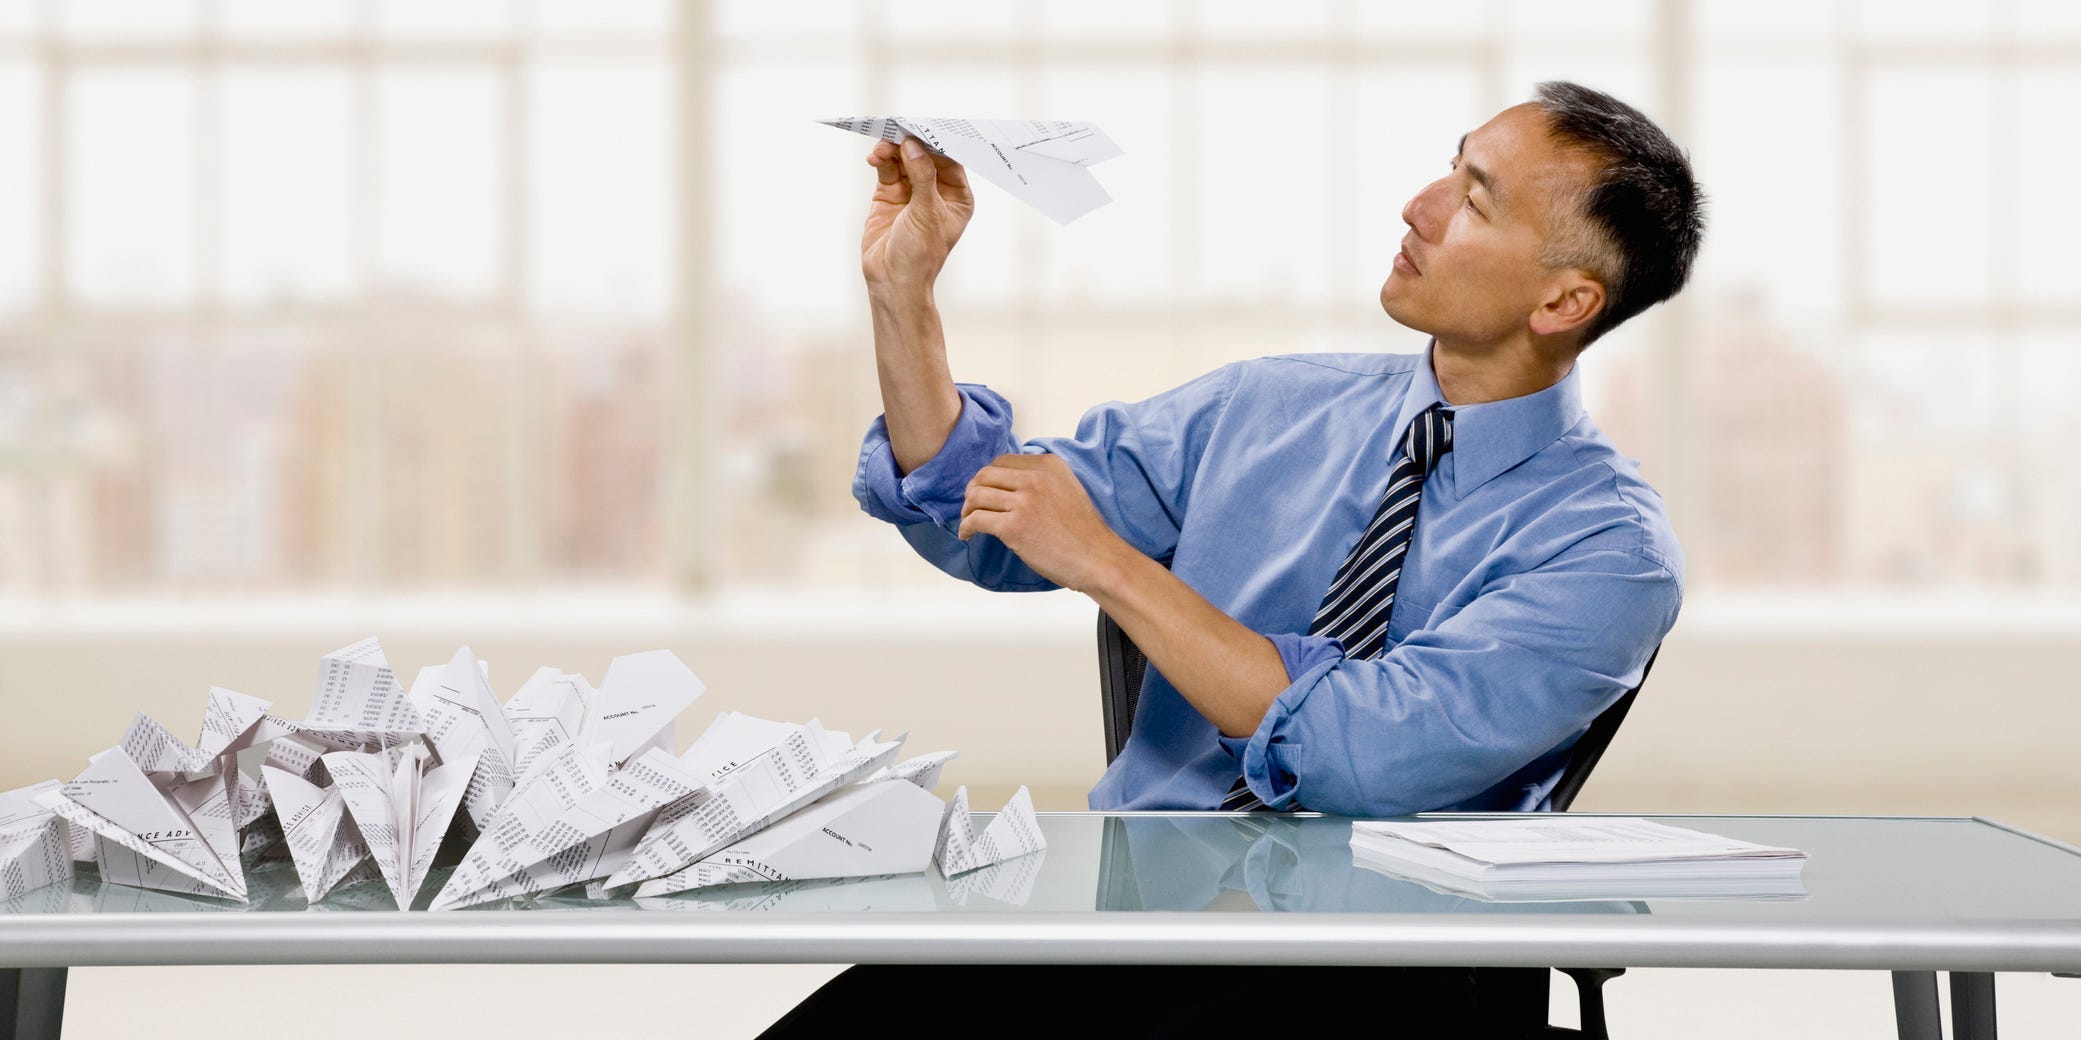 A man sits at his desk procrastinating by making paper airplanes instead of working.